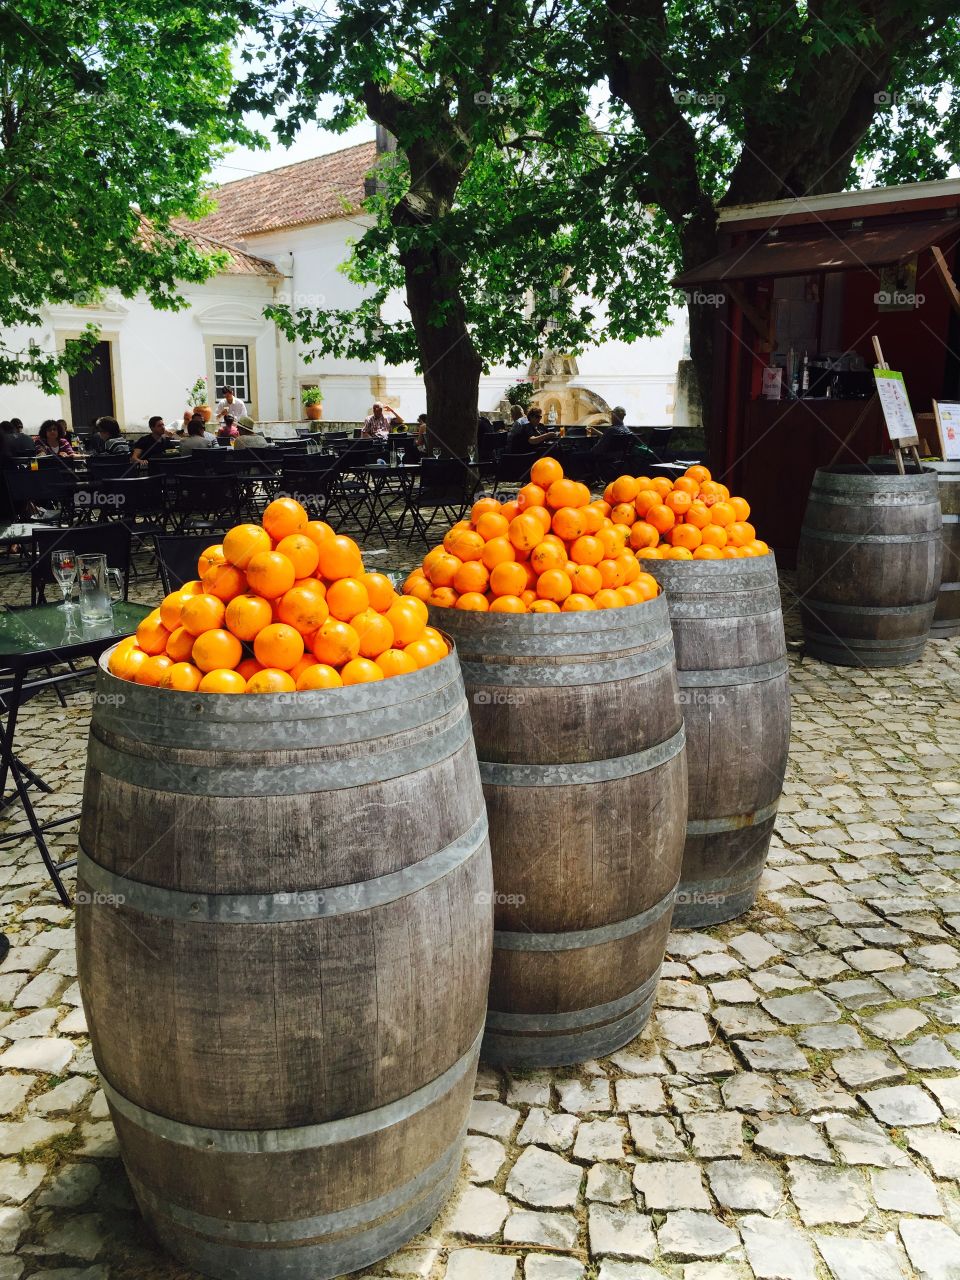 Orange tunnels being sold on the streets of Portugal. Cidade histórica de Óbidos